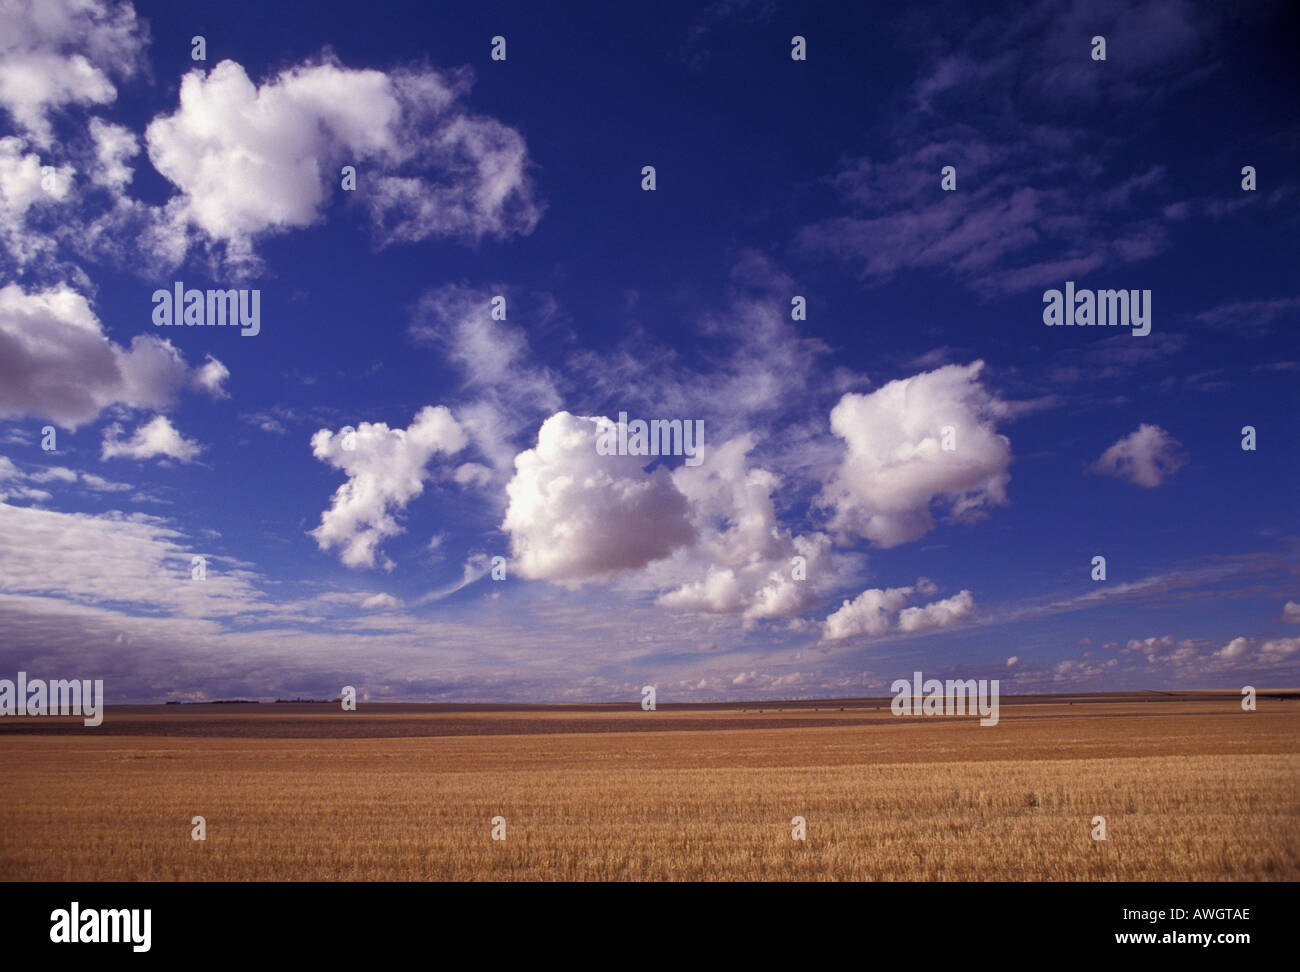 Big Sky Country southern alberta Canada with wide open skys filled with fast moving cumulus clouds over wheat field Stock Photo